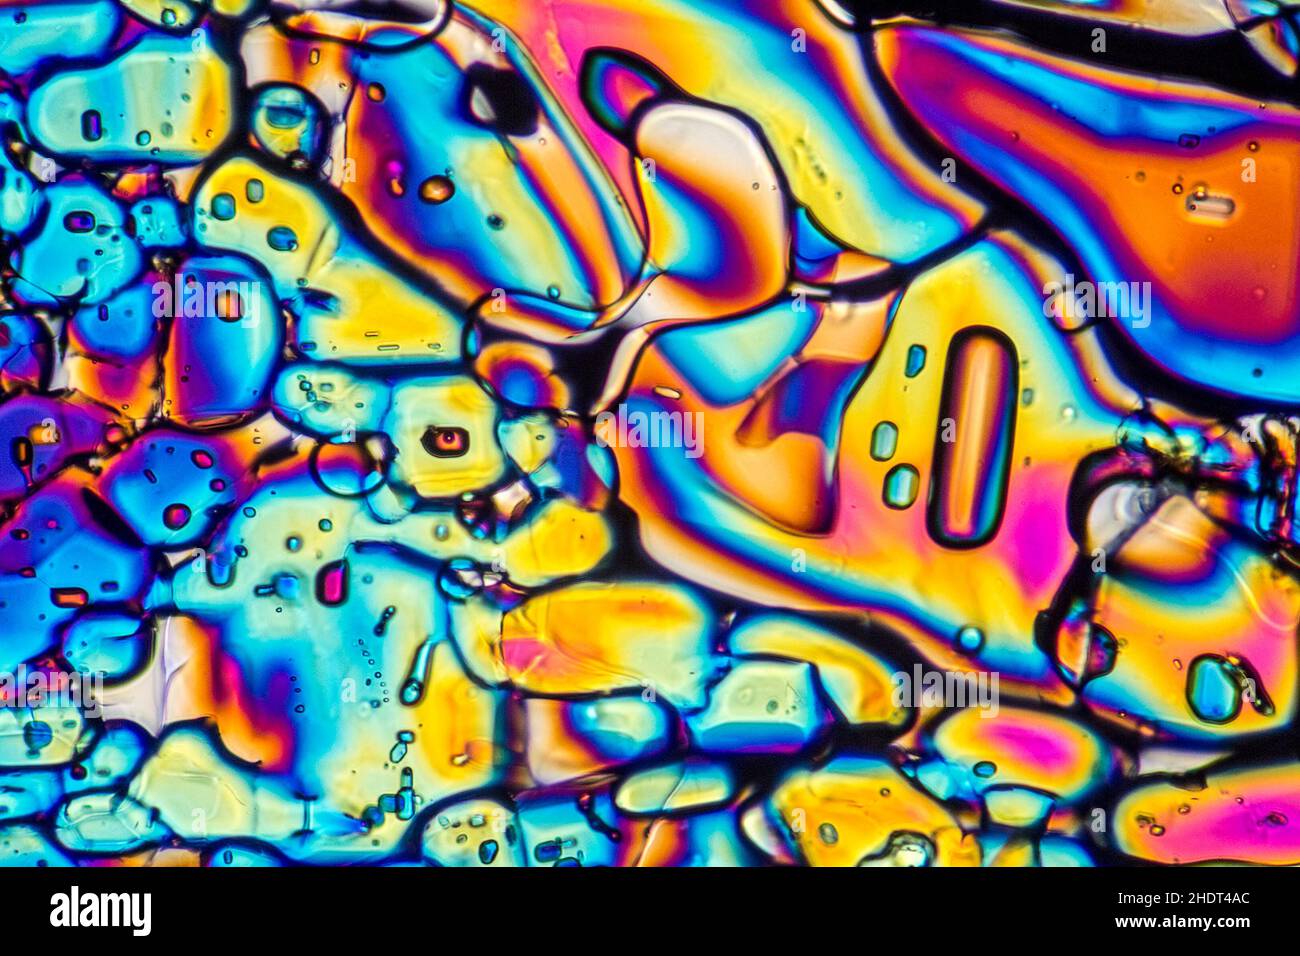 abstract, iridescent, magnification, psychedelic, microcrystal, abstraction, abstracts, iridescents, magnified, psychedelics Stock Photo